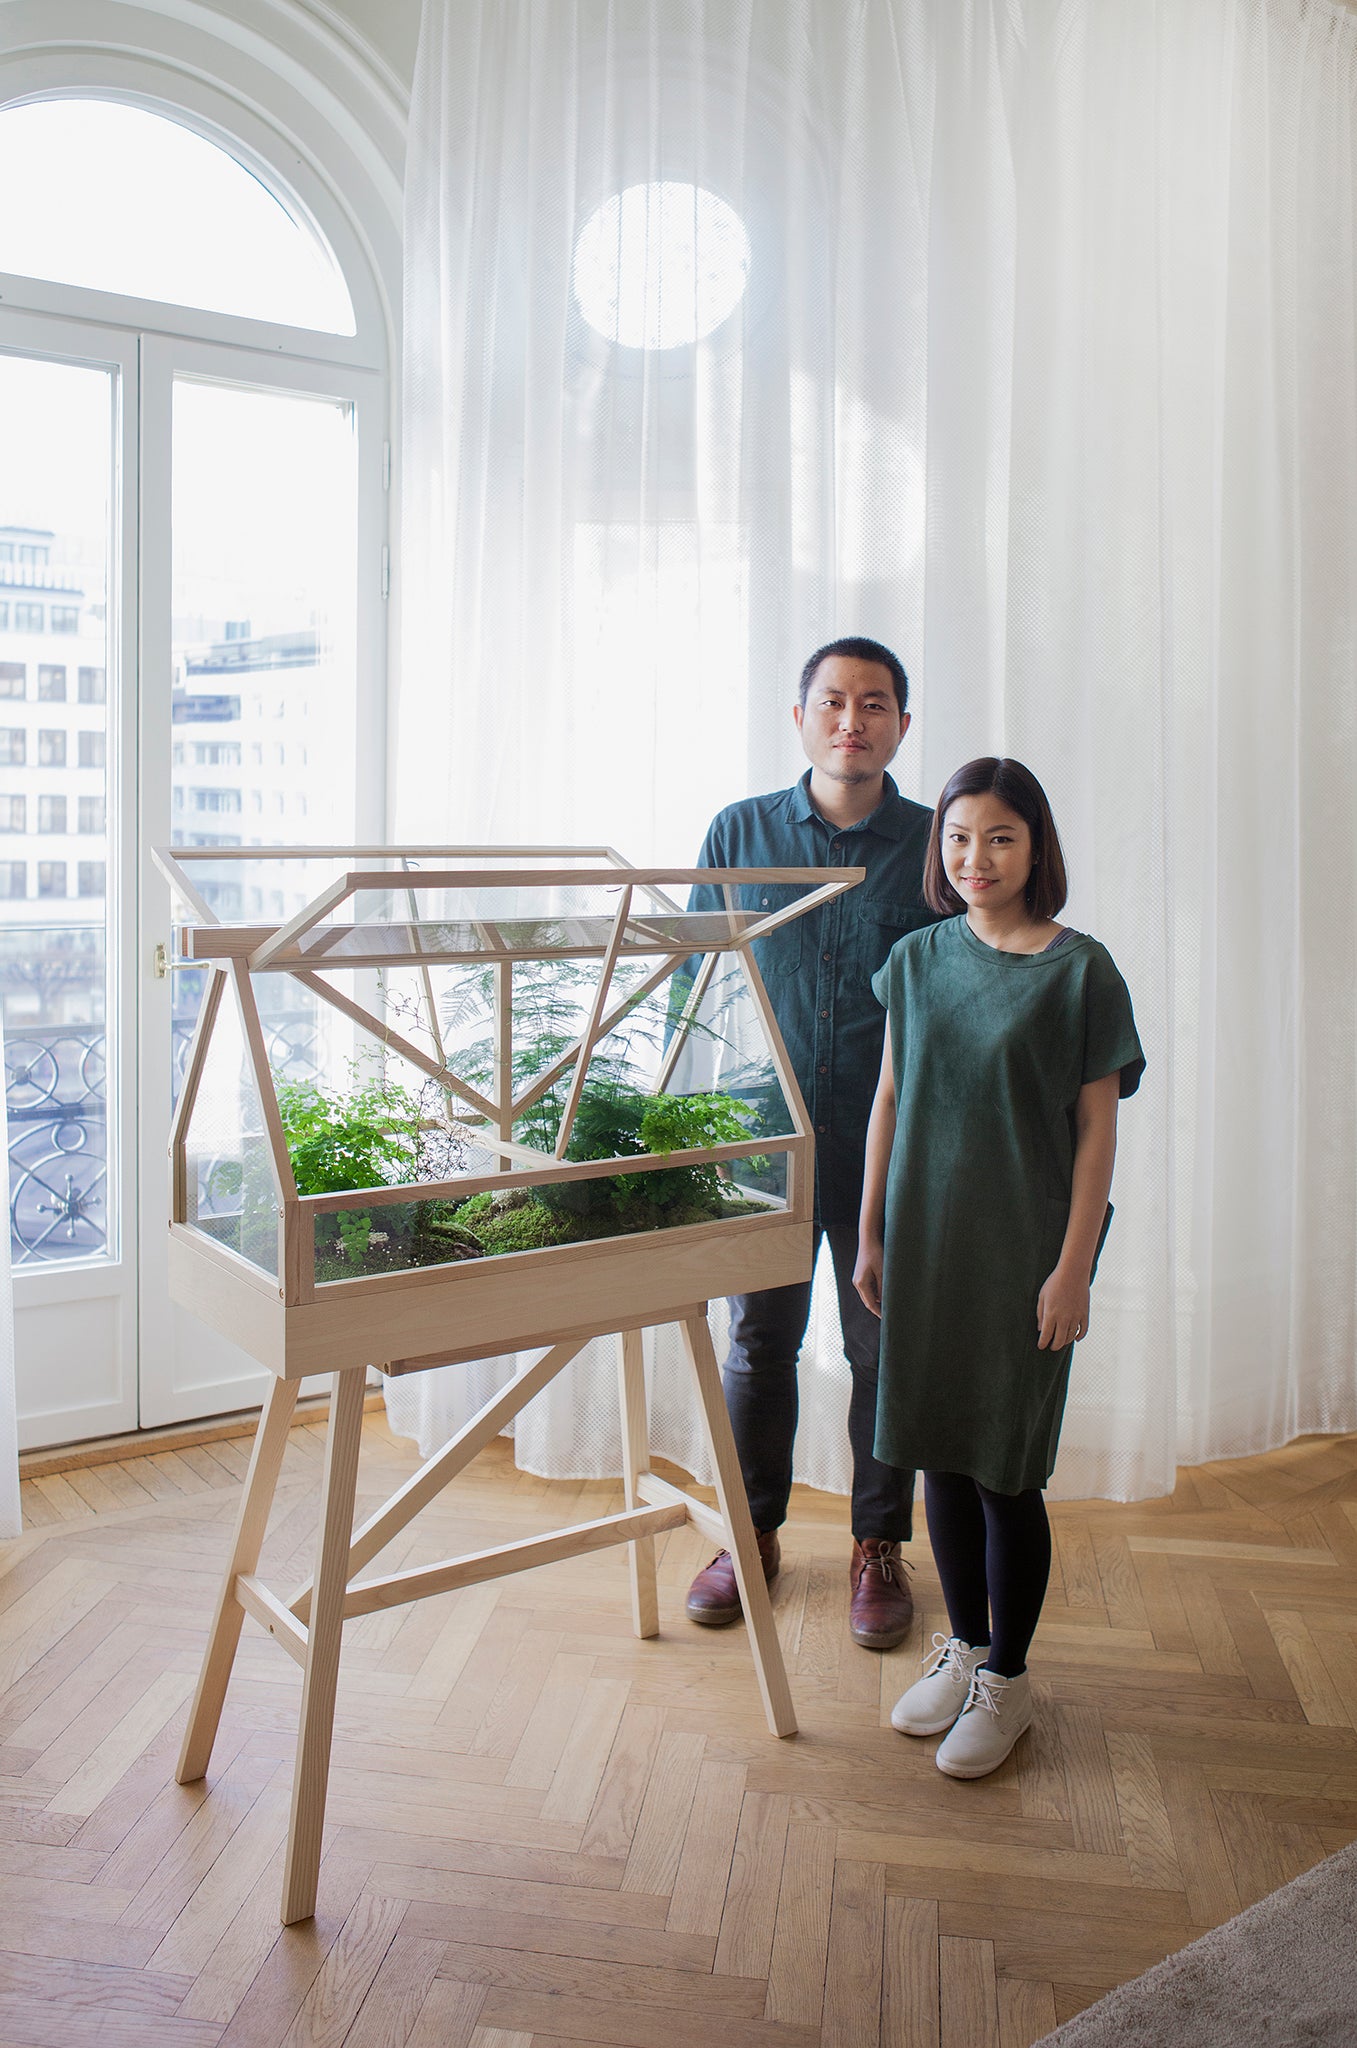 Worapong Manupipatpong and Ada Chirakranont with their Greenhouse for Design House Stockholm